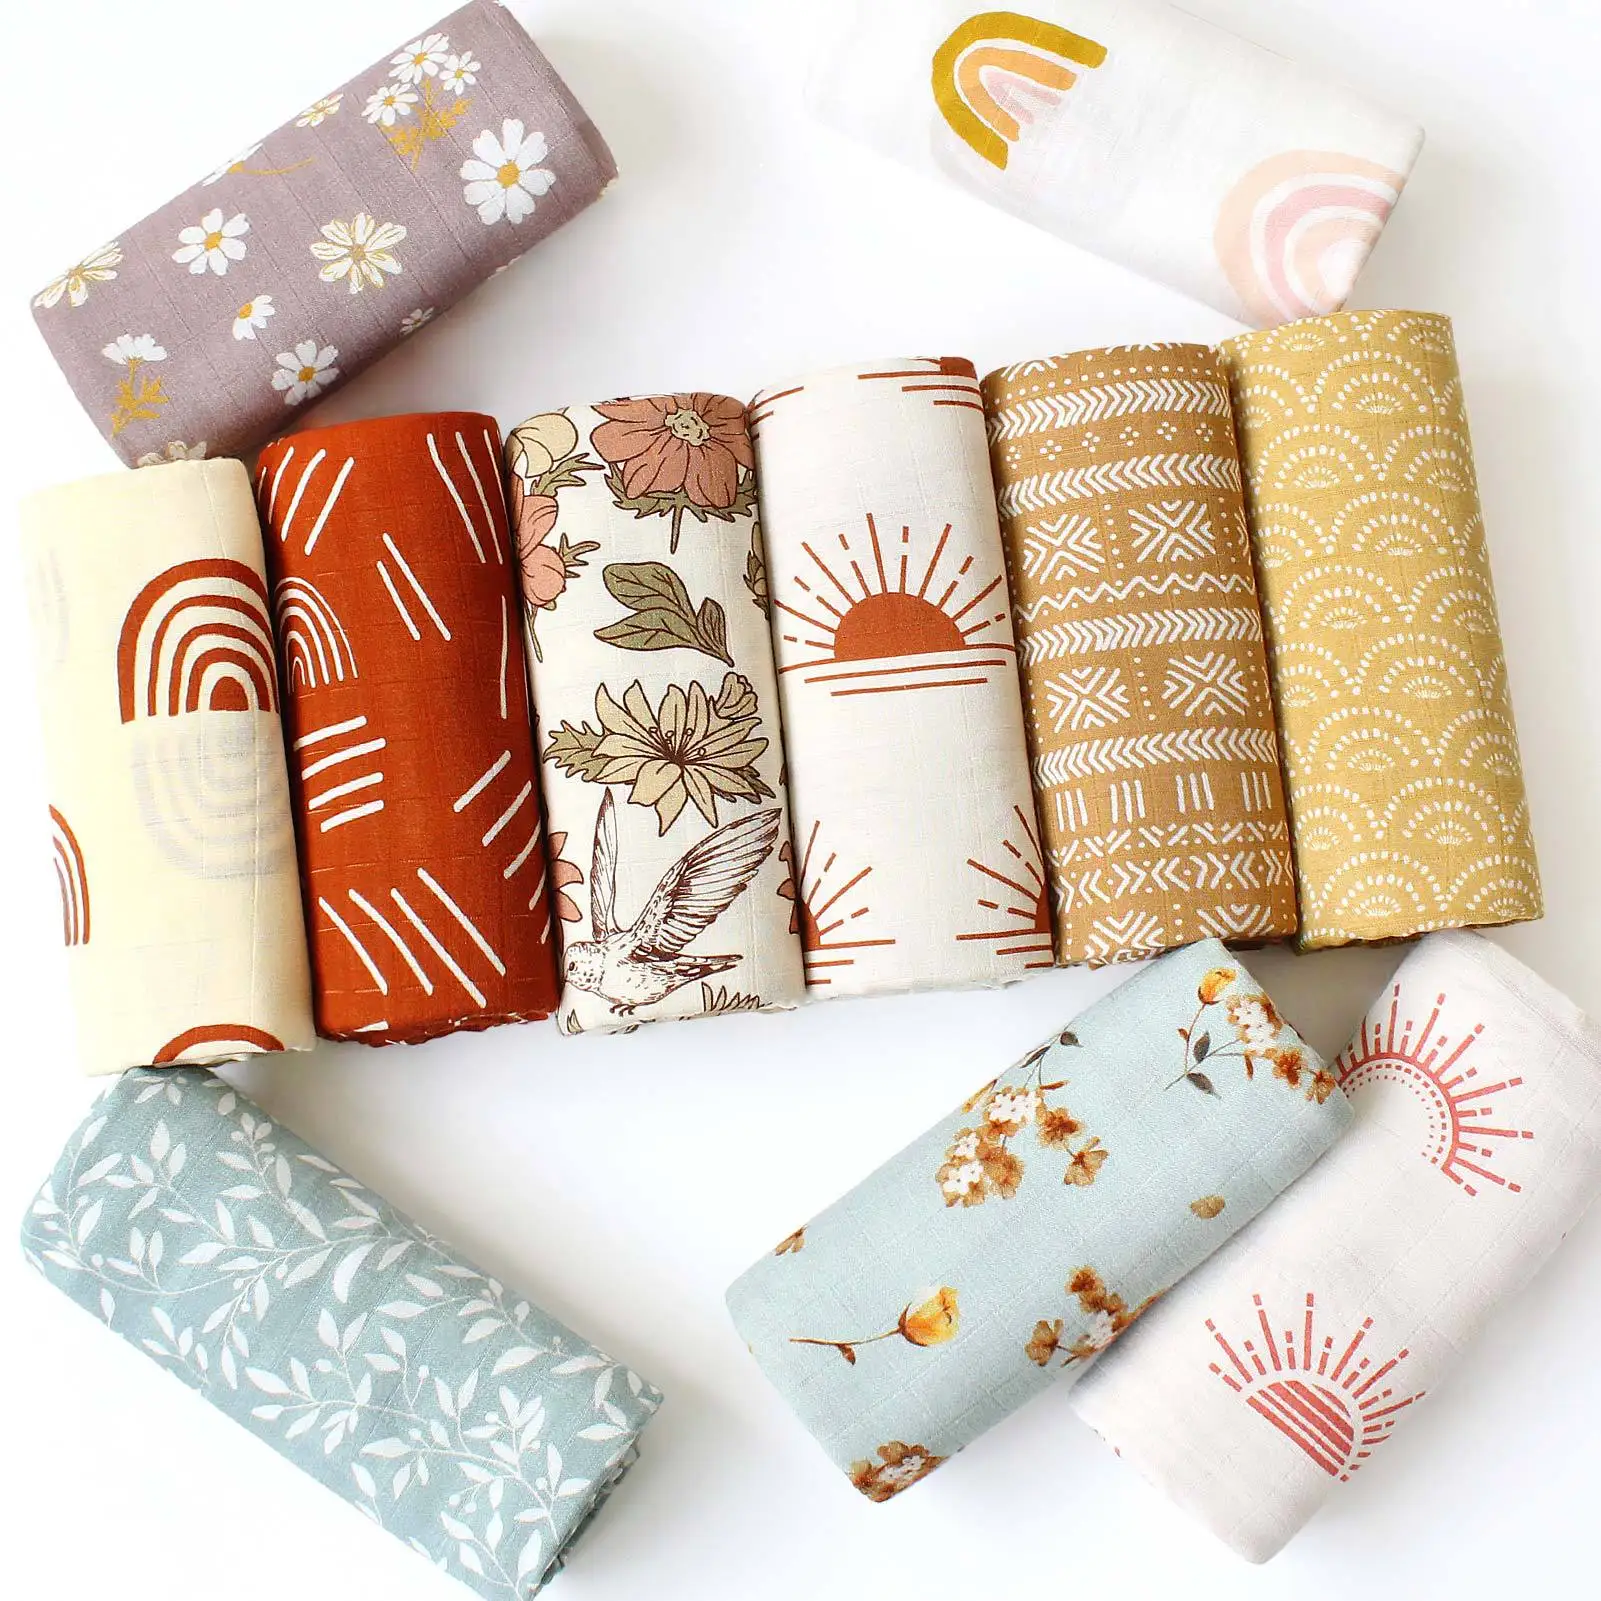 

120x120cm Muslin Bamboo Cotton Gauze Wrapping Towel Baby Wrapping Baby Hug Quilt Blanket Newborn Swaddle Towel Summer Bath Towel